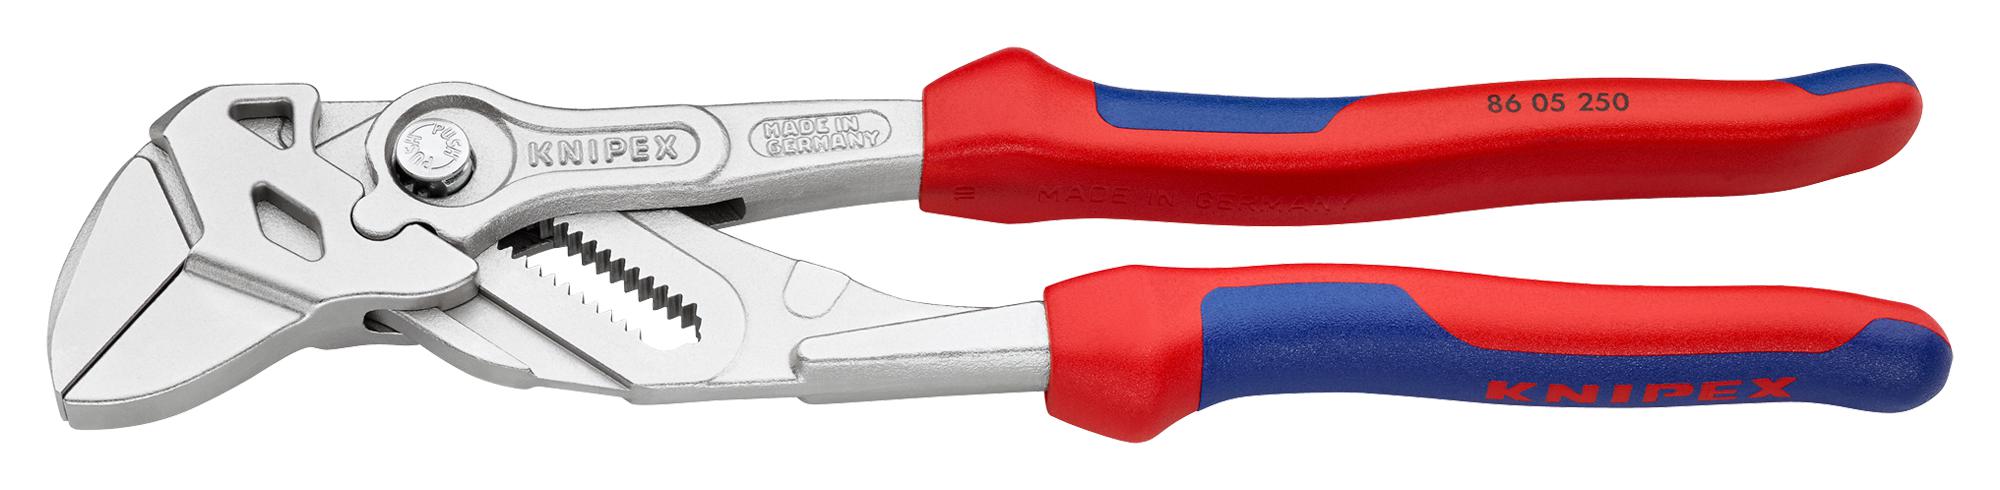 86 05 250 PLIER, WRENCH, 250MM KNIPEX